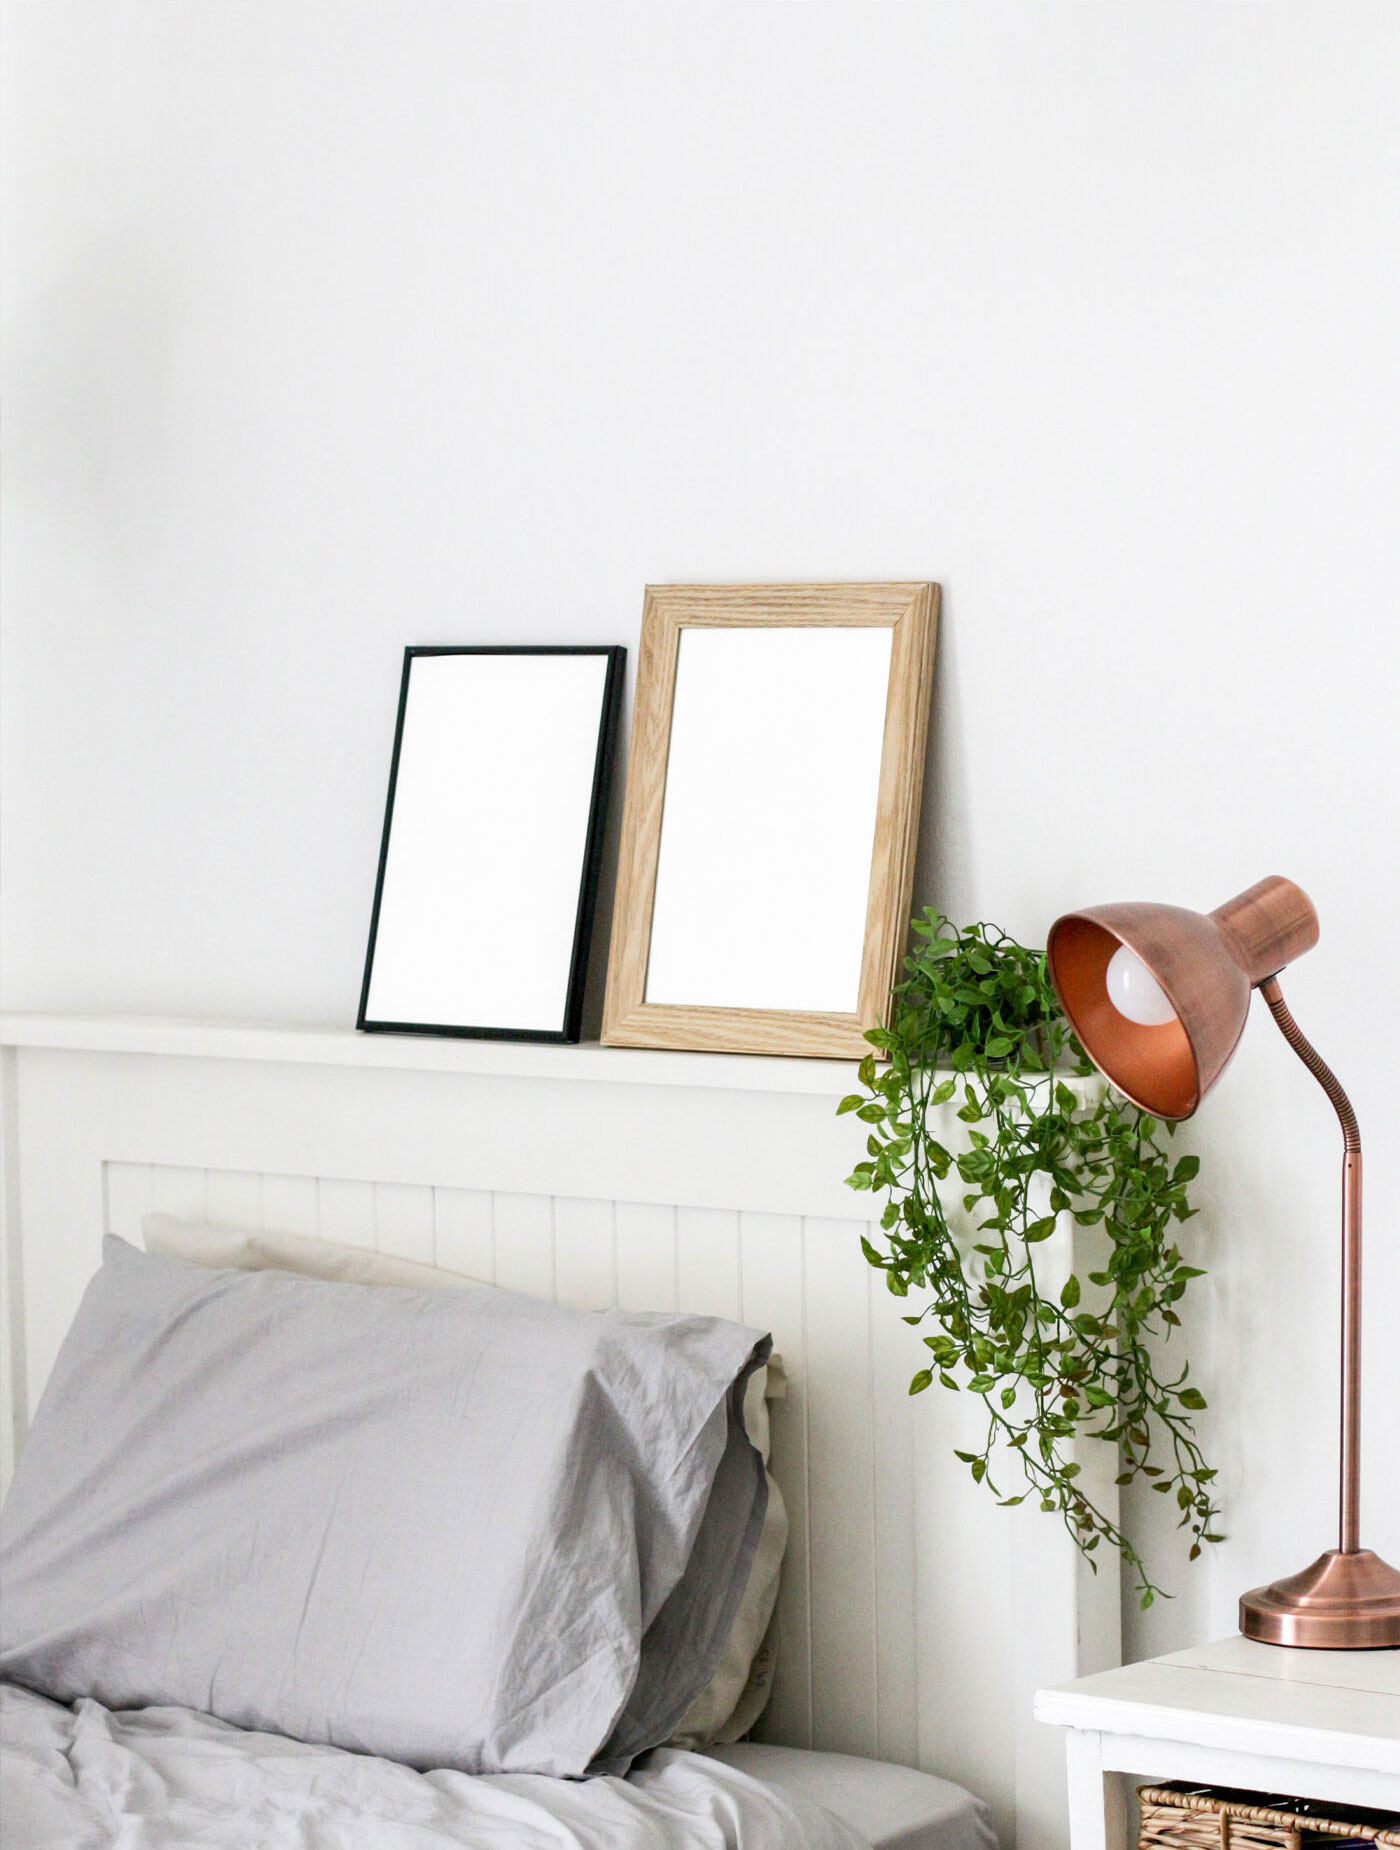 Mockup Featuring Two Frames against the Wall in Bedroom Setting FREE PSD